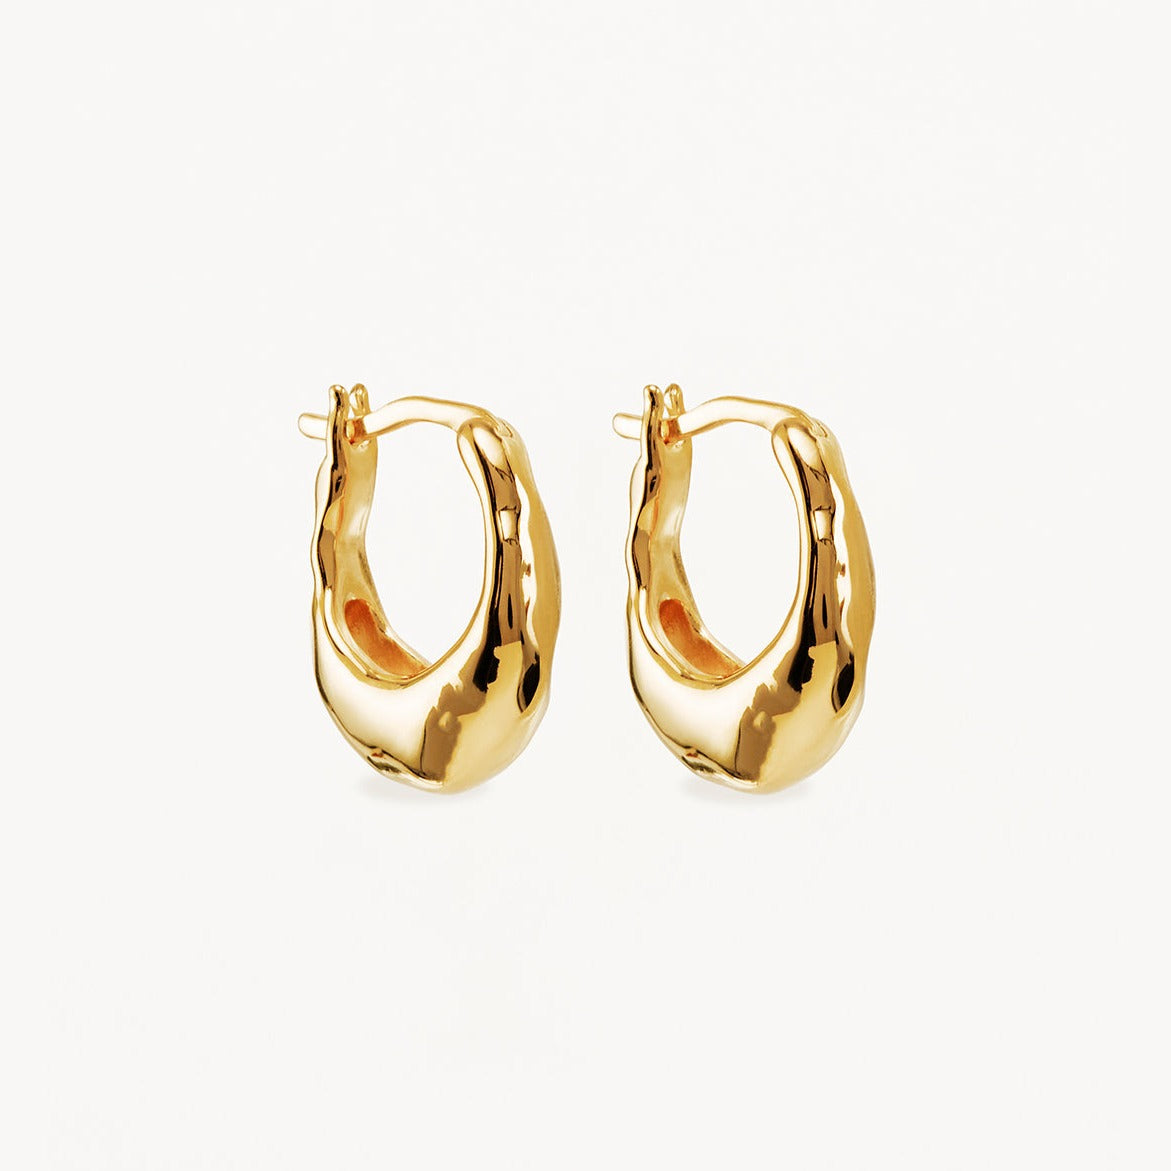 By Charlotte Radiant Energy Small Hoop Earrings, Gold or Silver